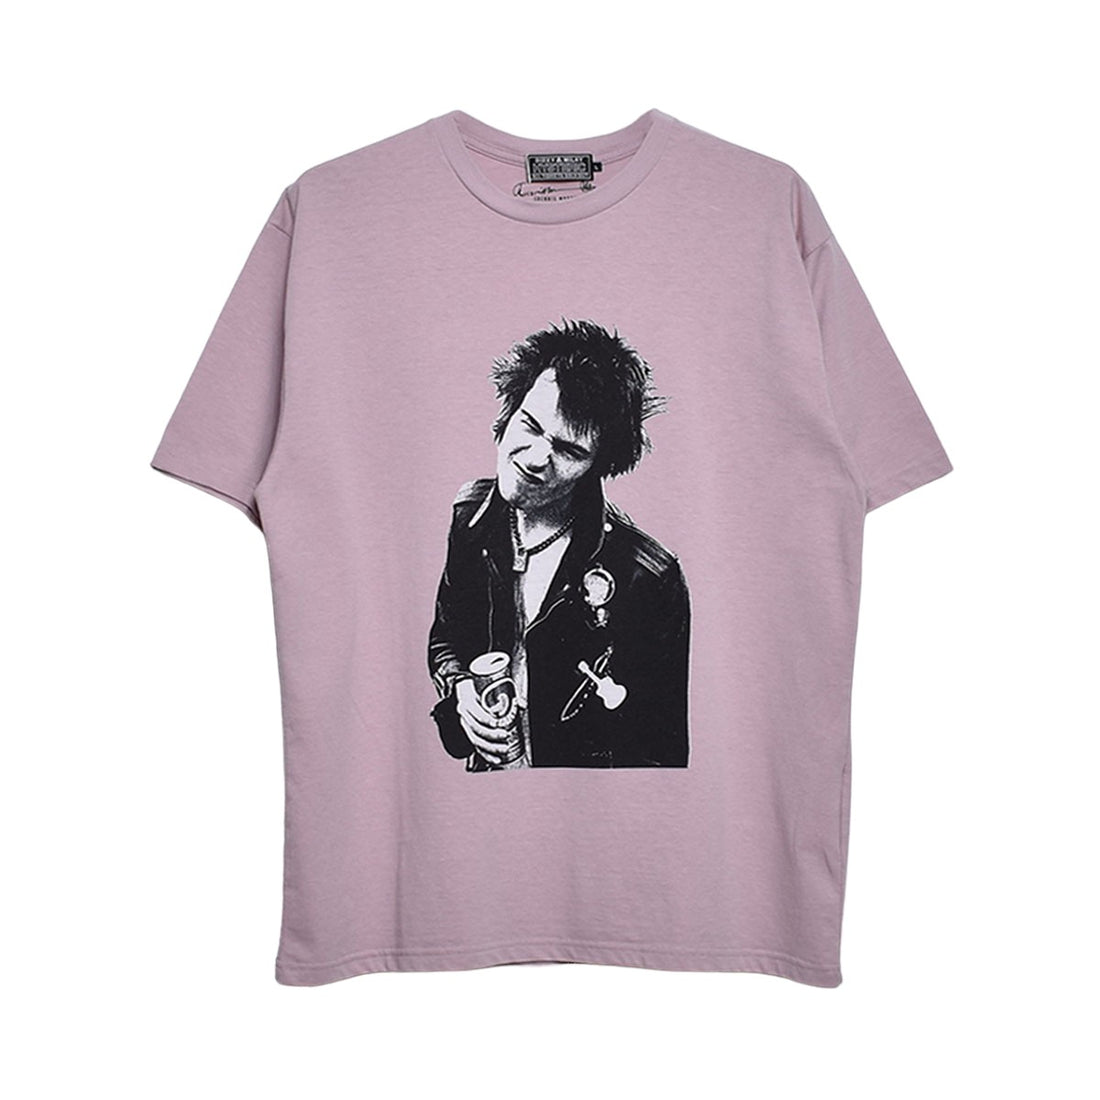 [HYSTERIC GLAMOUR]DENNIS MORRIS/SID VICIOUS Tシャツ/PINK(02241CT25)